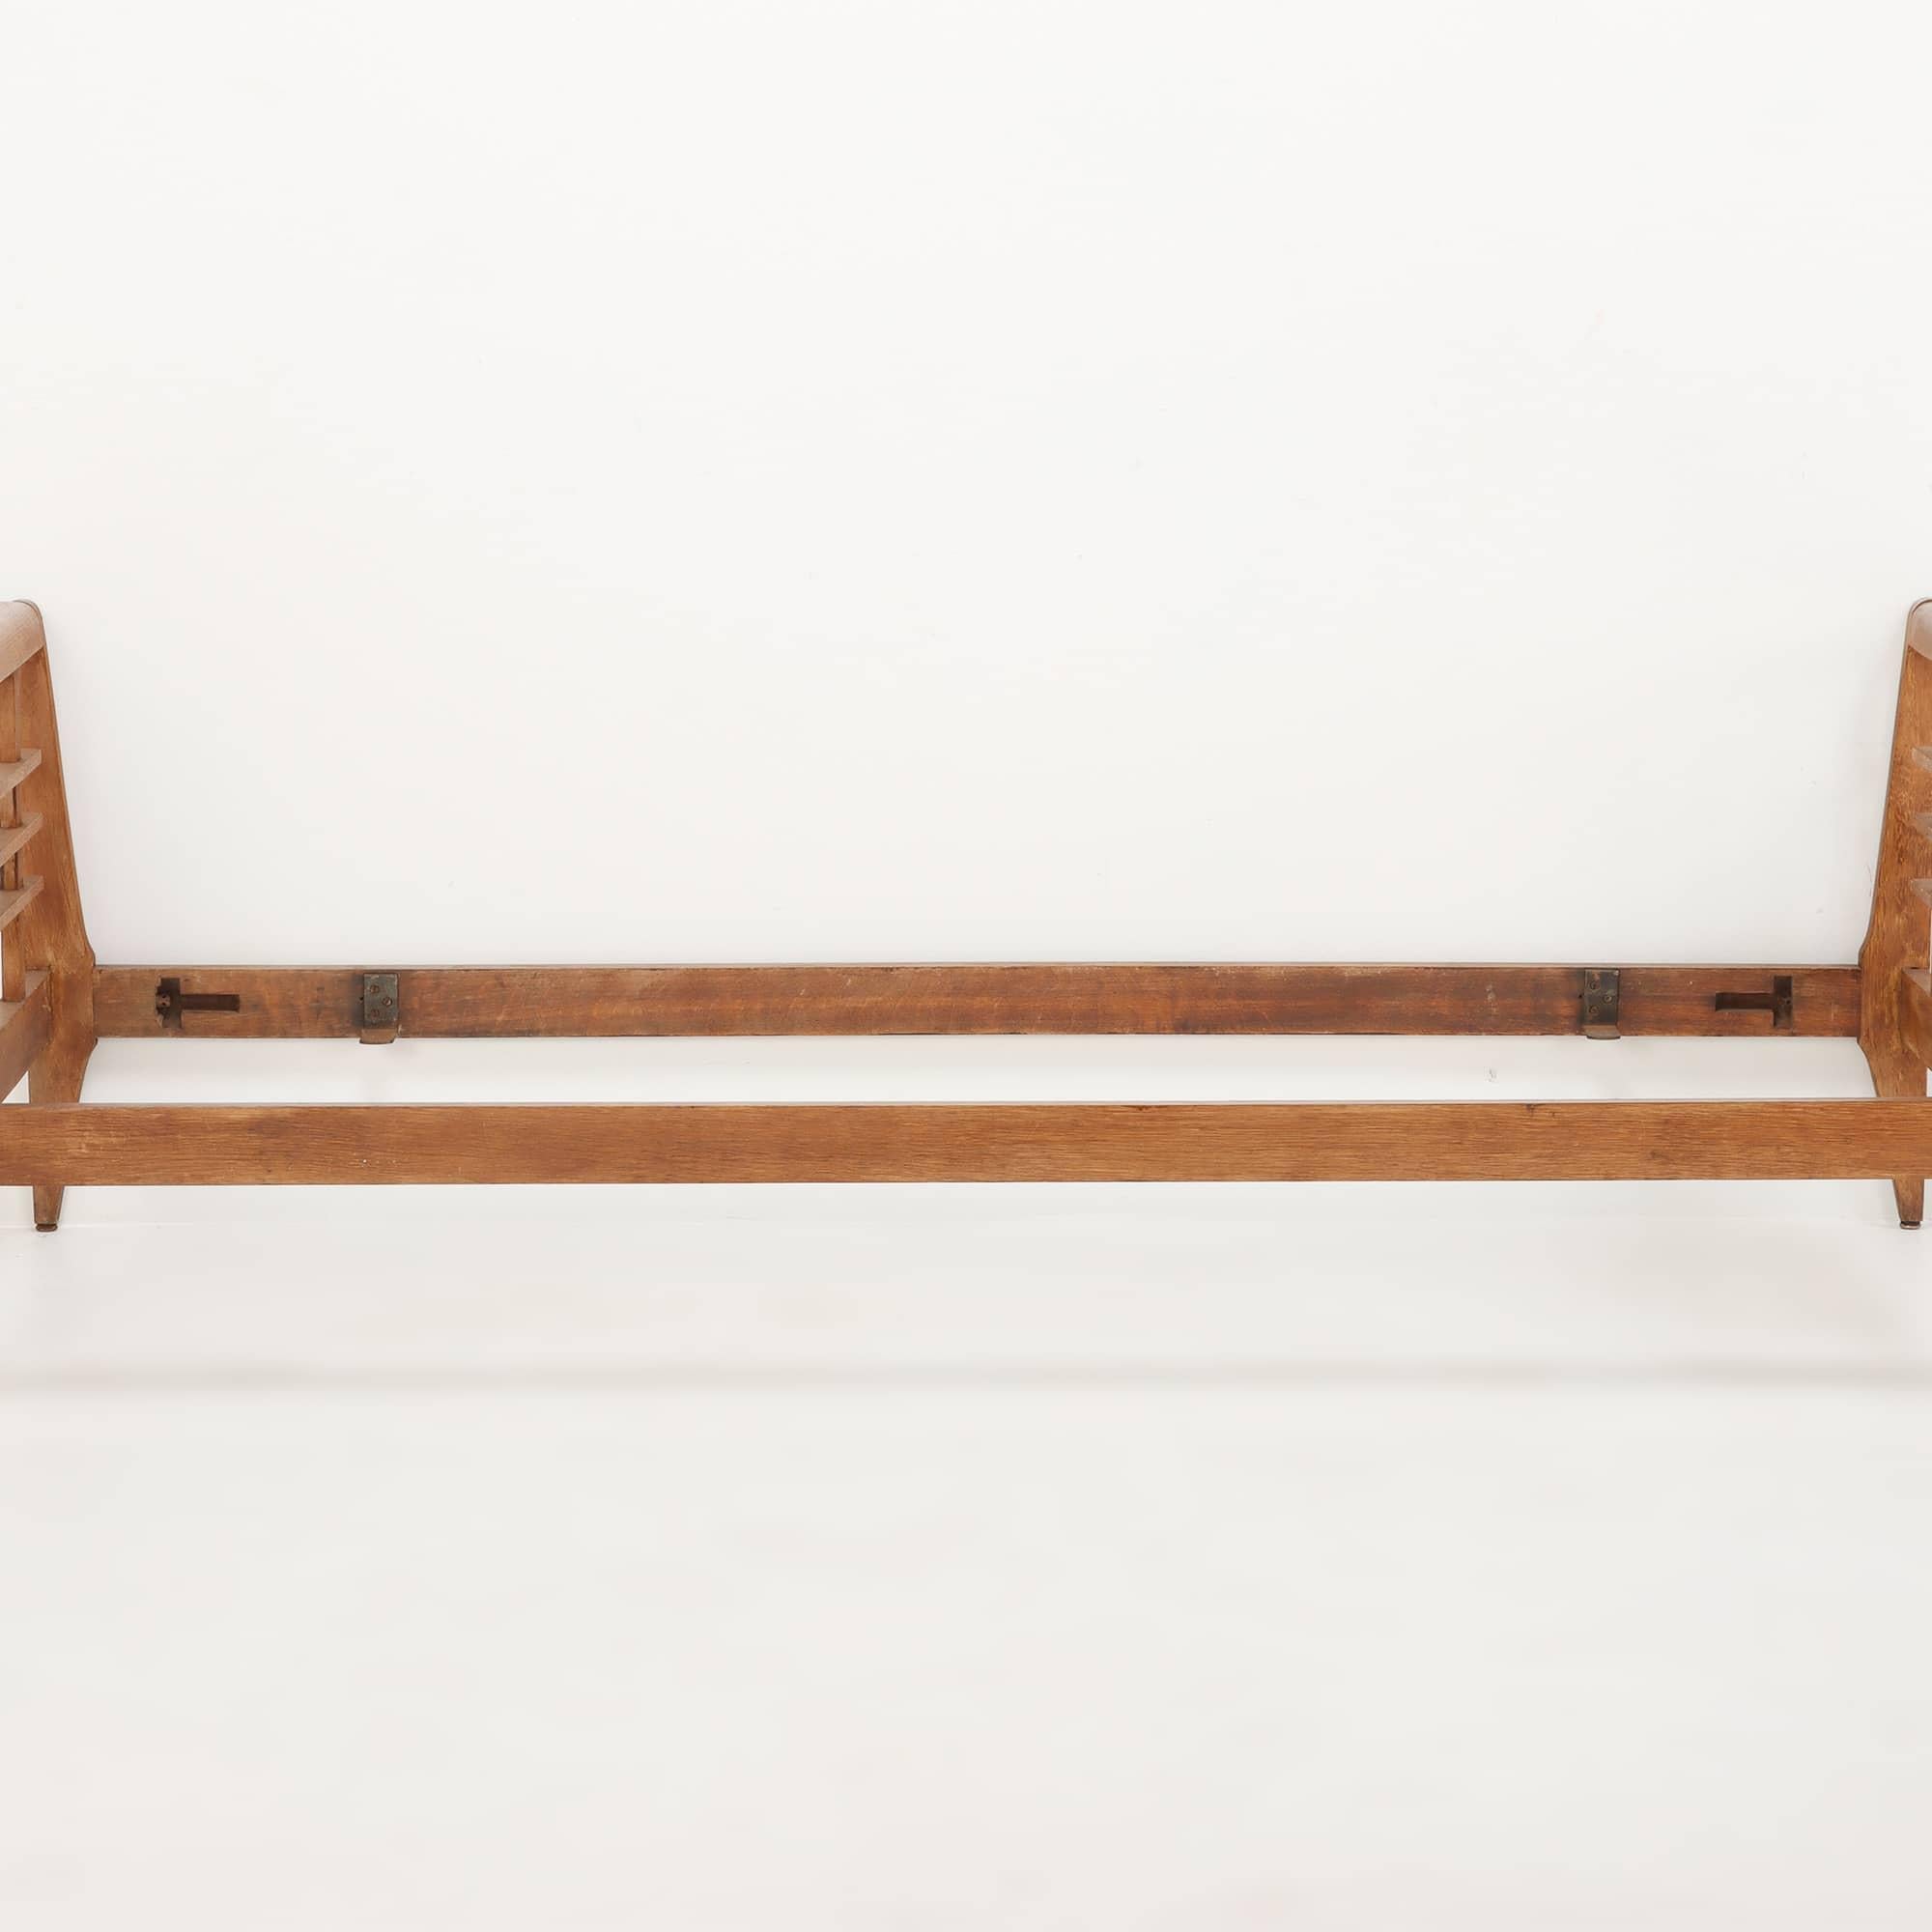 French oak daybed  C 1940. We have a pair so could be used as twin beds. would make a nice sofa as well. comes apart for transport or stairs. Interior Dimensions 31.25